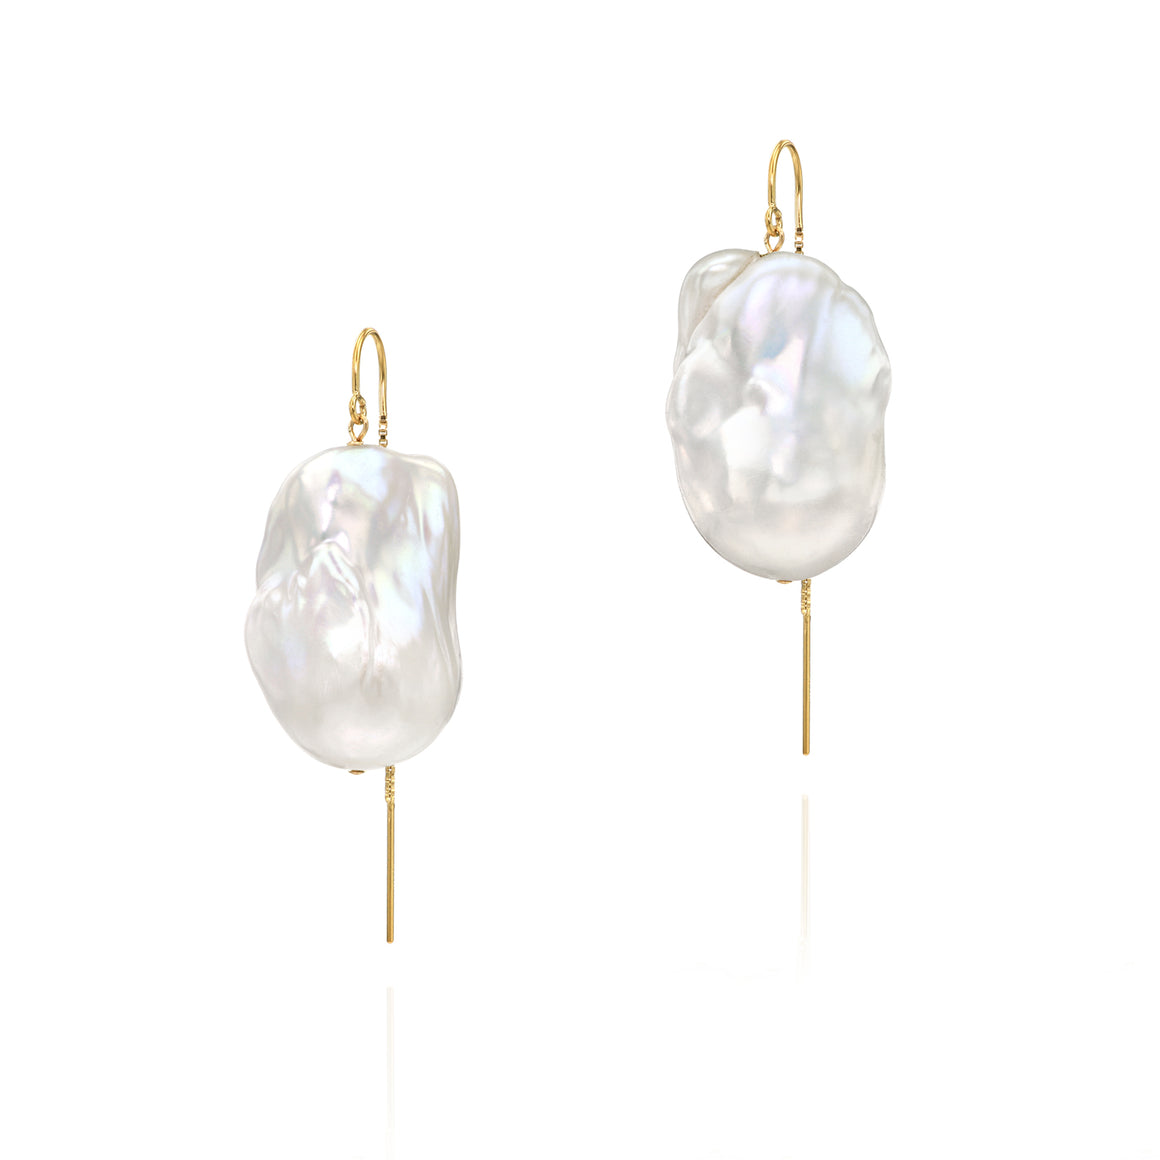 XXL Runway Size White Baroque Freshwater Pearl Drop Threader Earrings 14K Yellow Gold